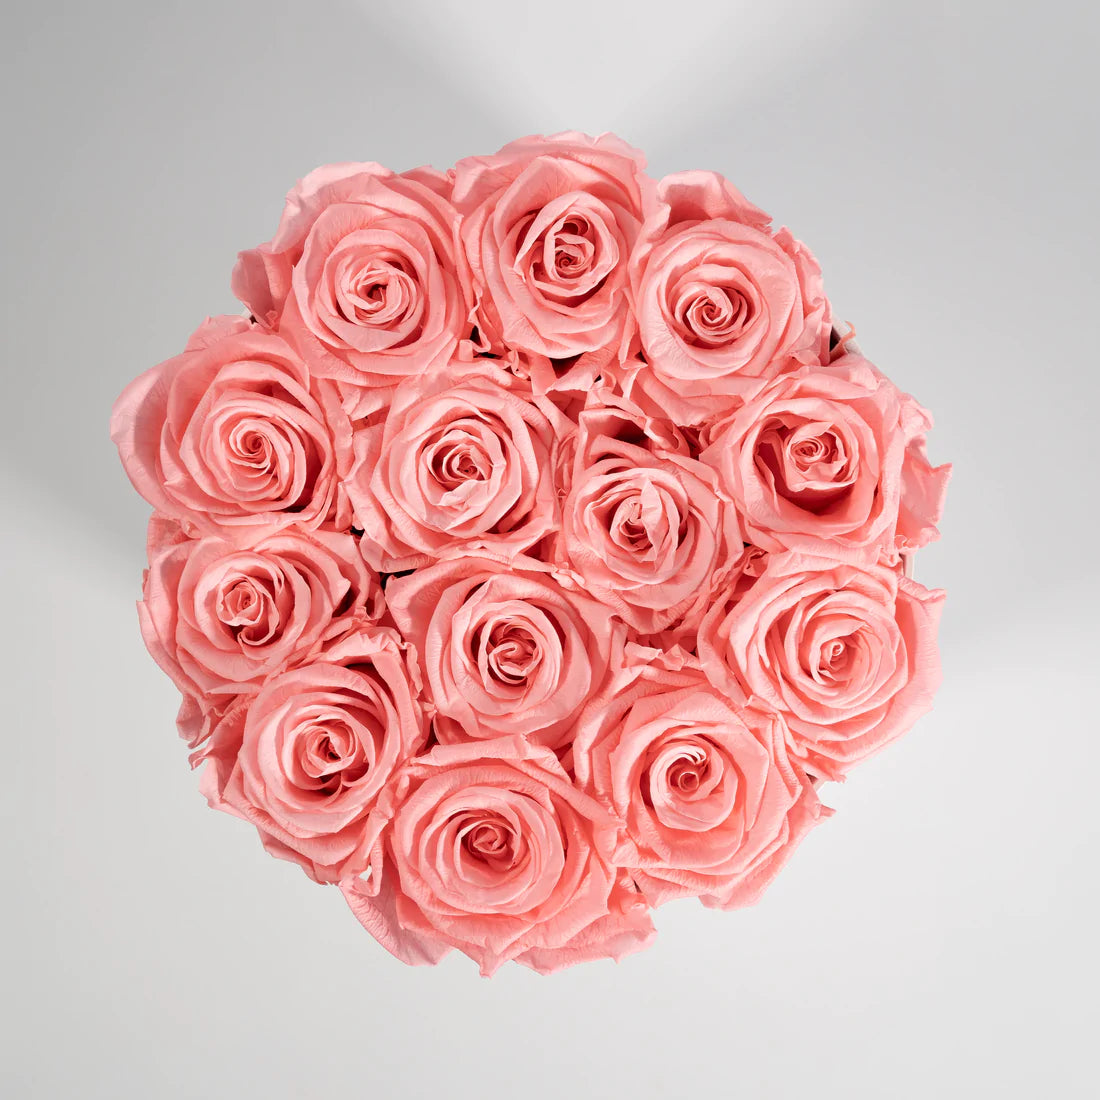 How Do We Cultivate The Different Colours of Roses? – Amarante London